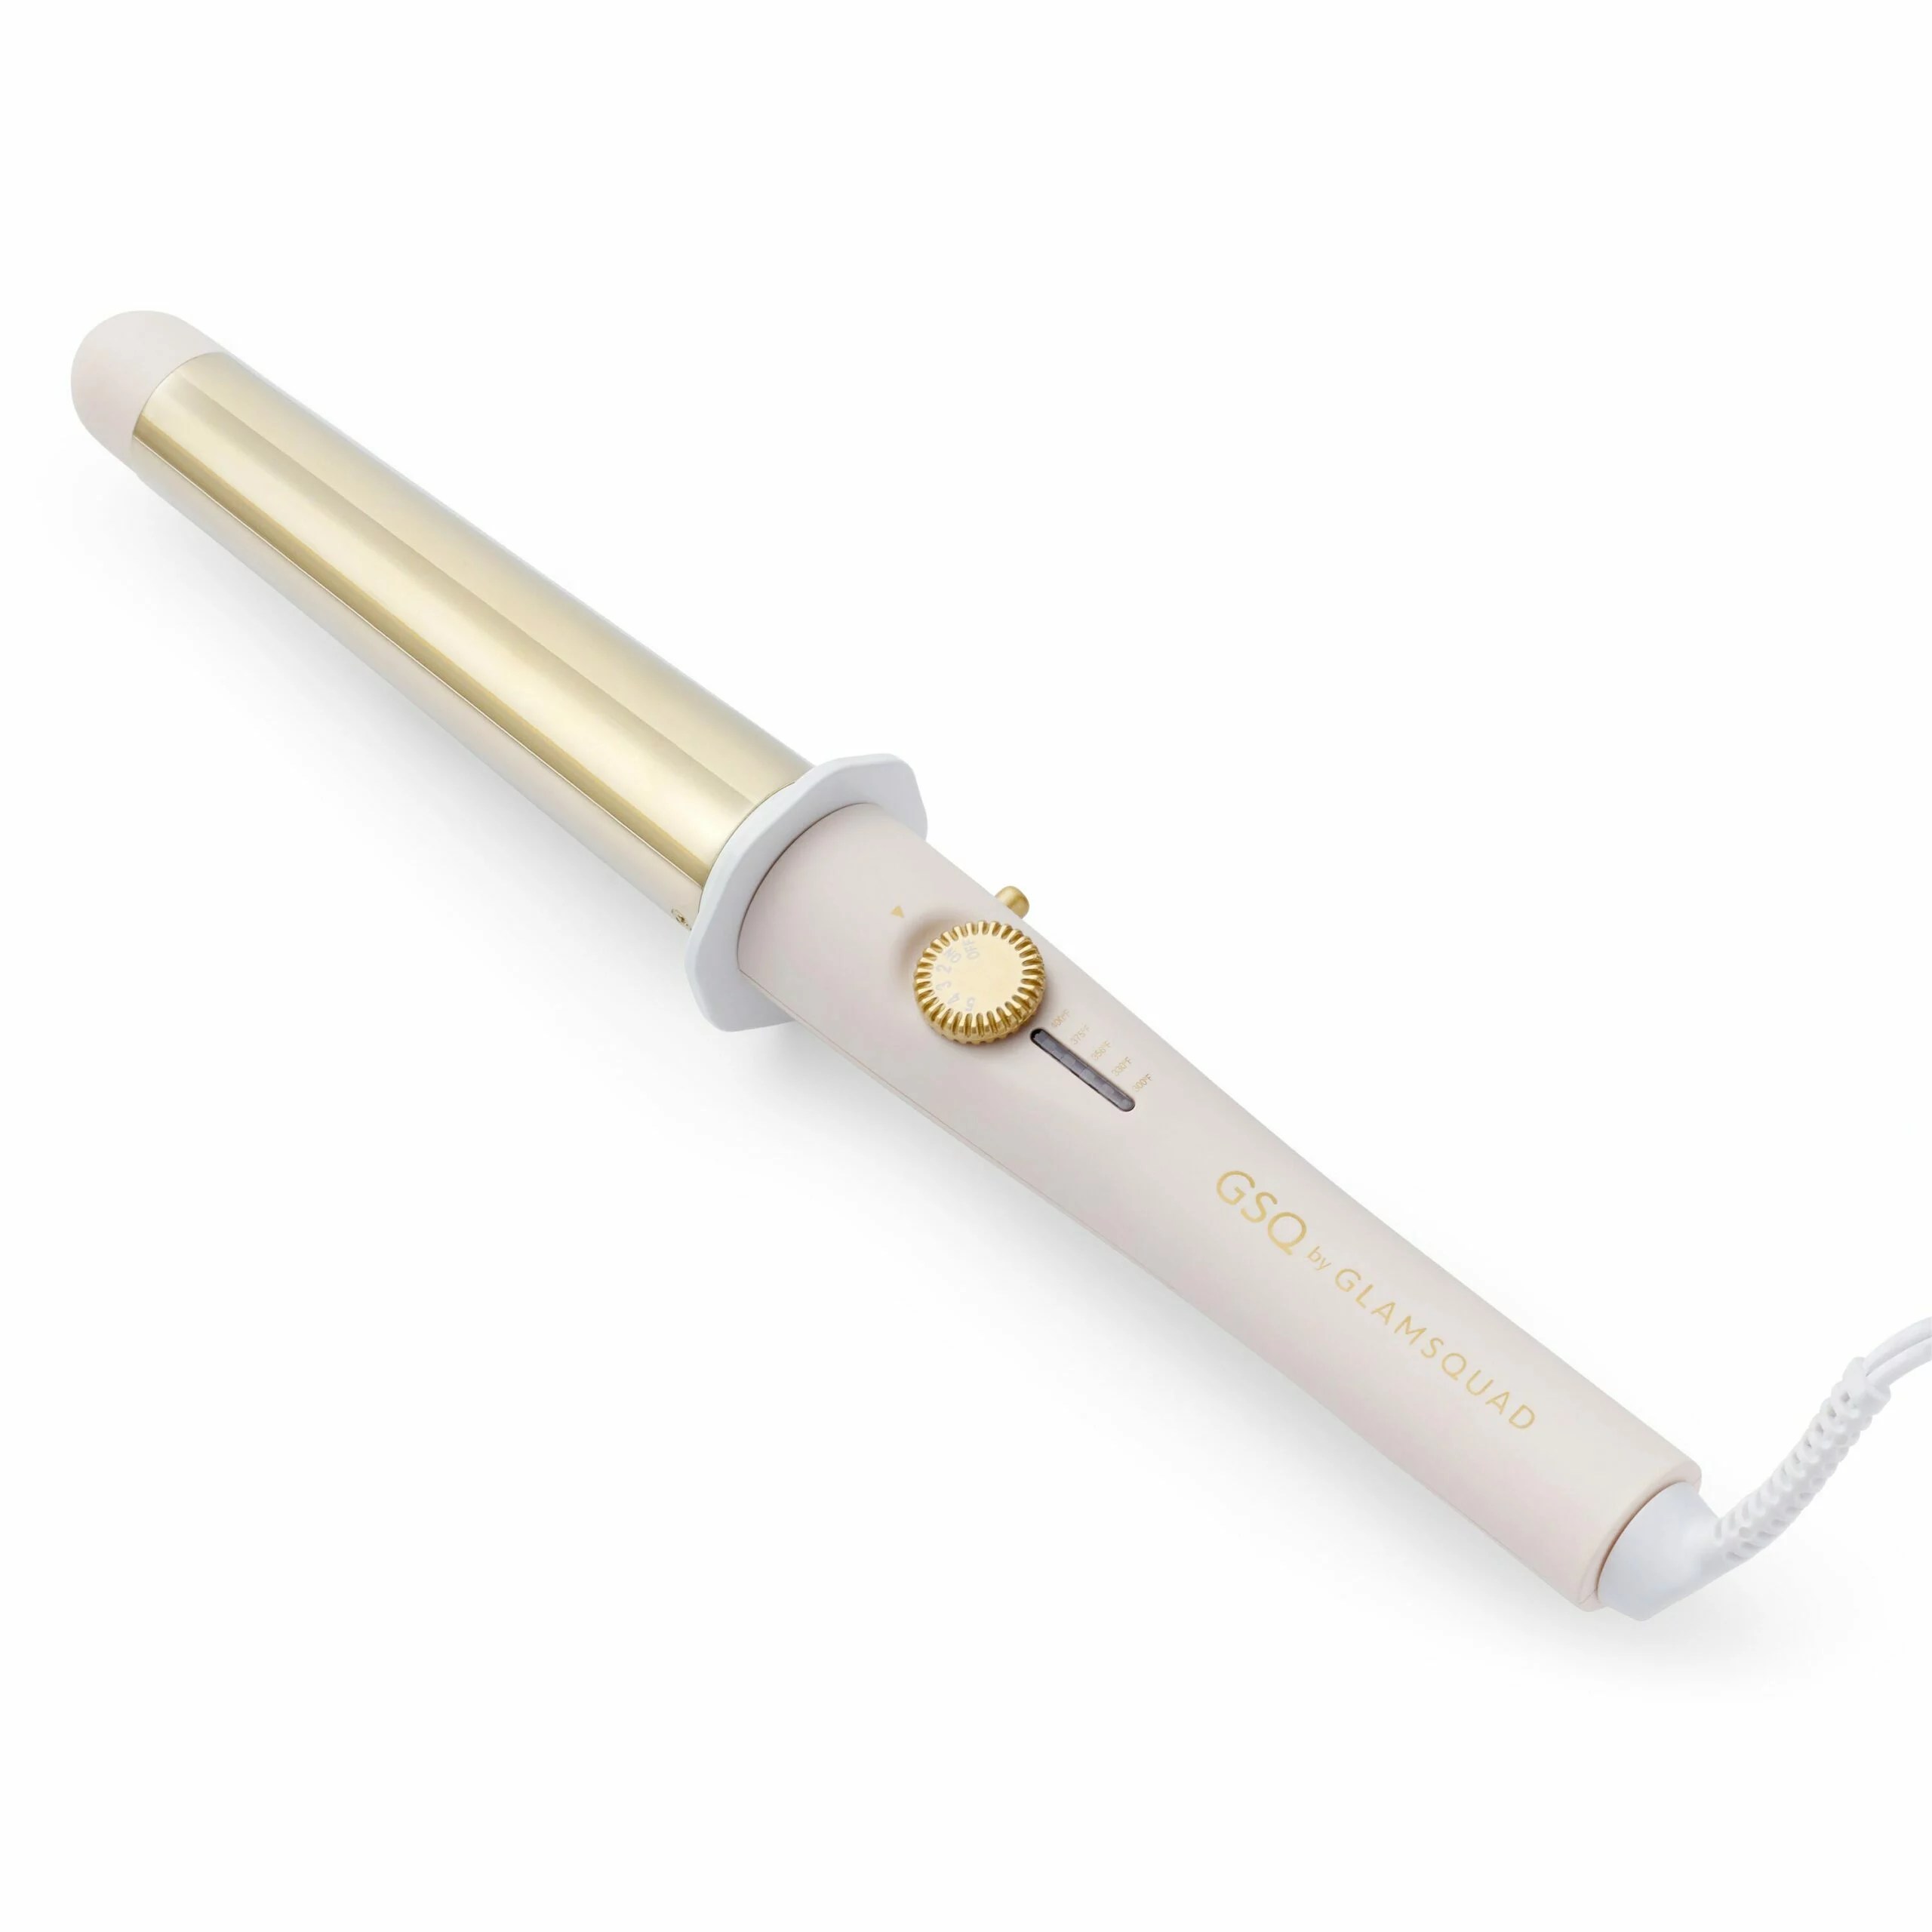 GSQ by Glamsquad Adjustable Curling Wand